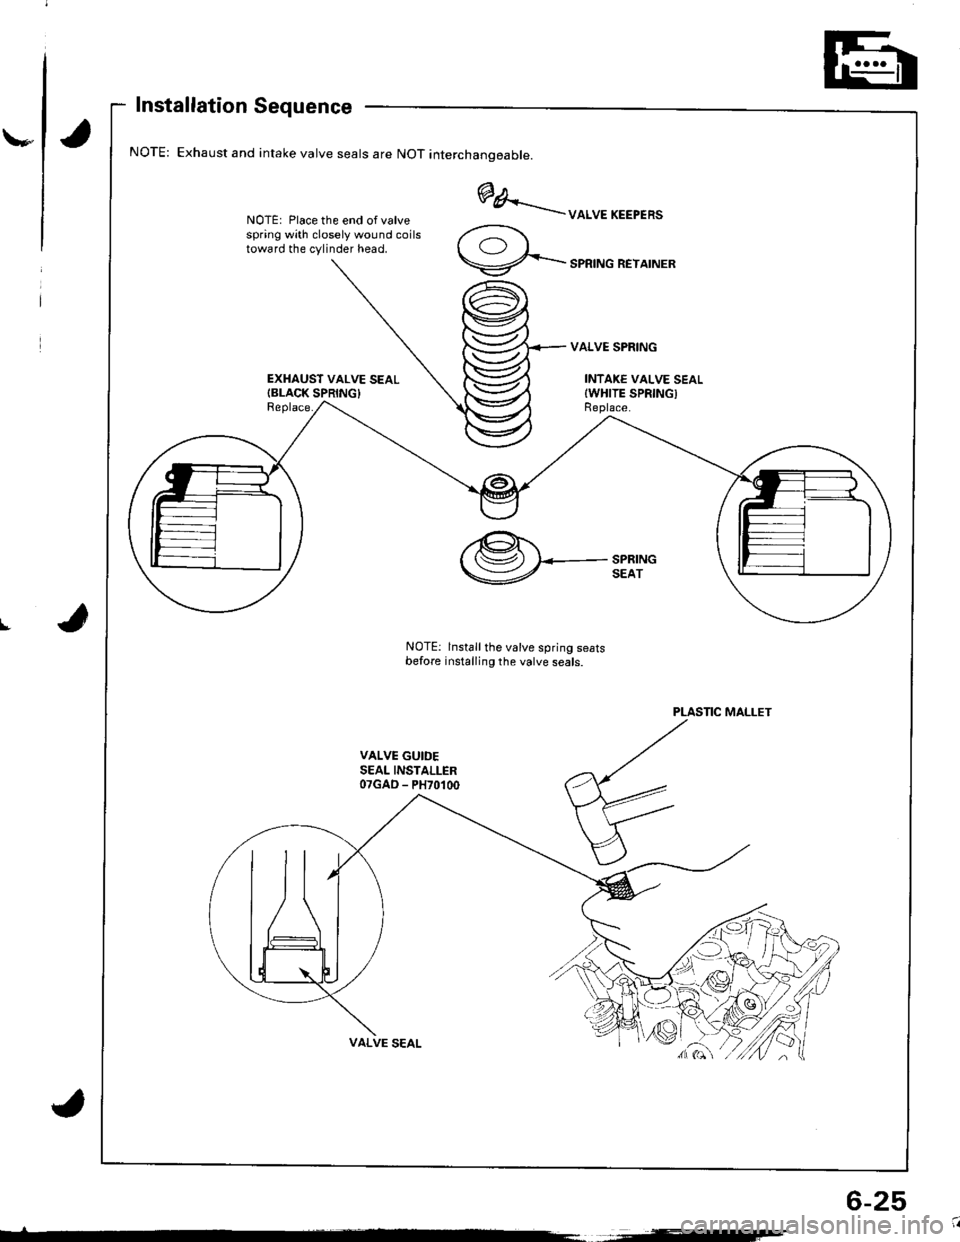 HONDA INTEGRA 1998 4.G Workshop Manual \-
Installation Sequence
Exhaust and intake valve seals are NOT interchanoeable.
NOTE: Place the end of valvespring with closely wound coilstoward the cylinder head.
EXHAUST VALVE SEALIBLACK SPRING}Re